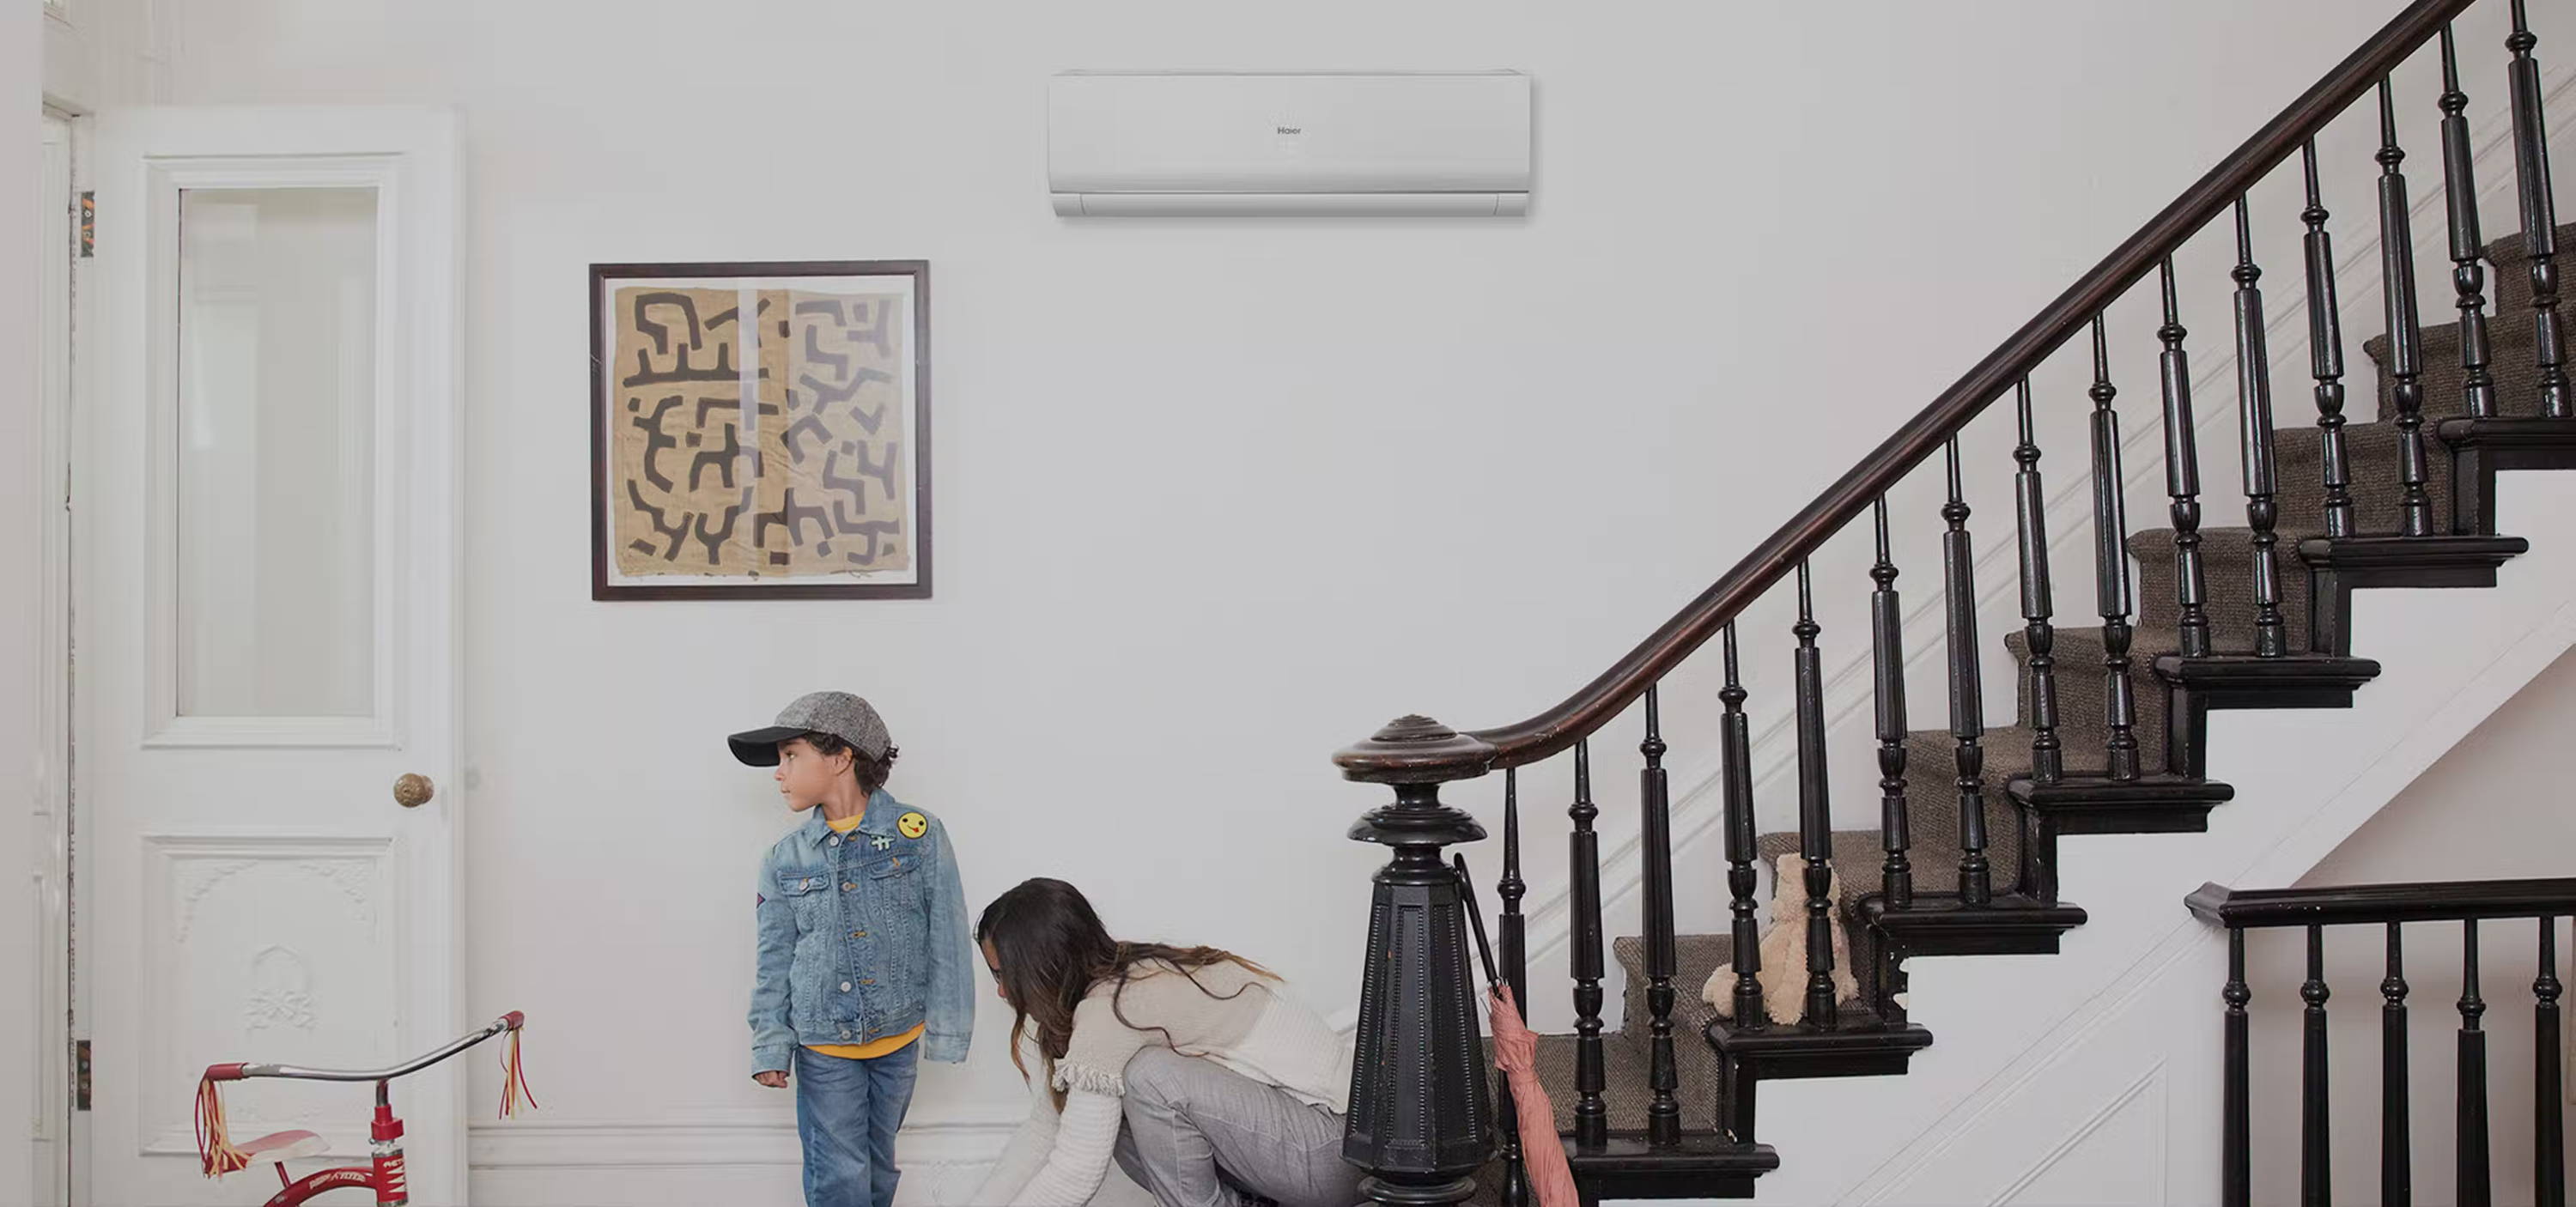 Photo of a Haier ductless wall mount mini split air conditioner installed in foyer of home